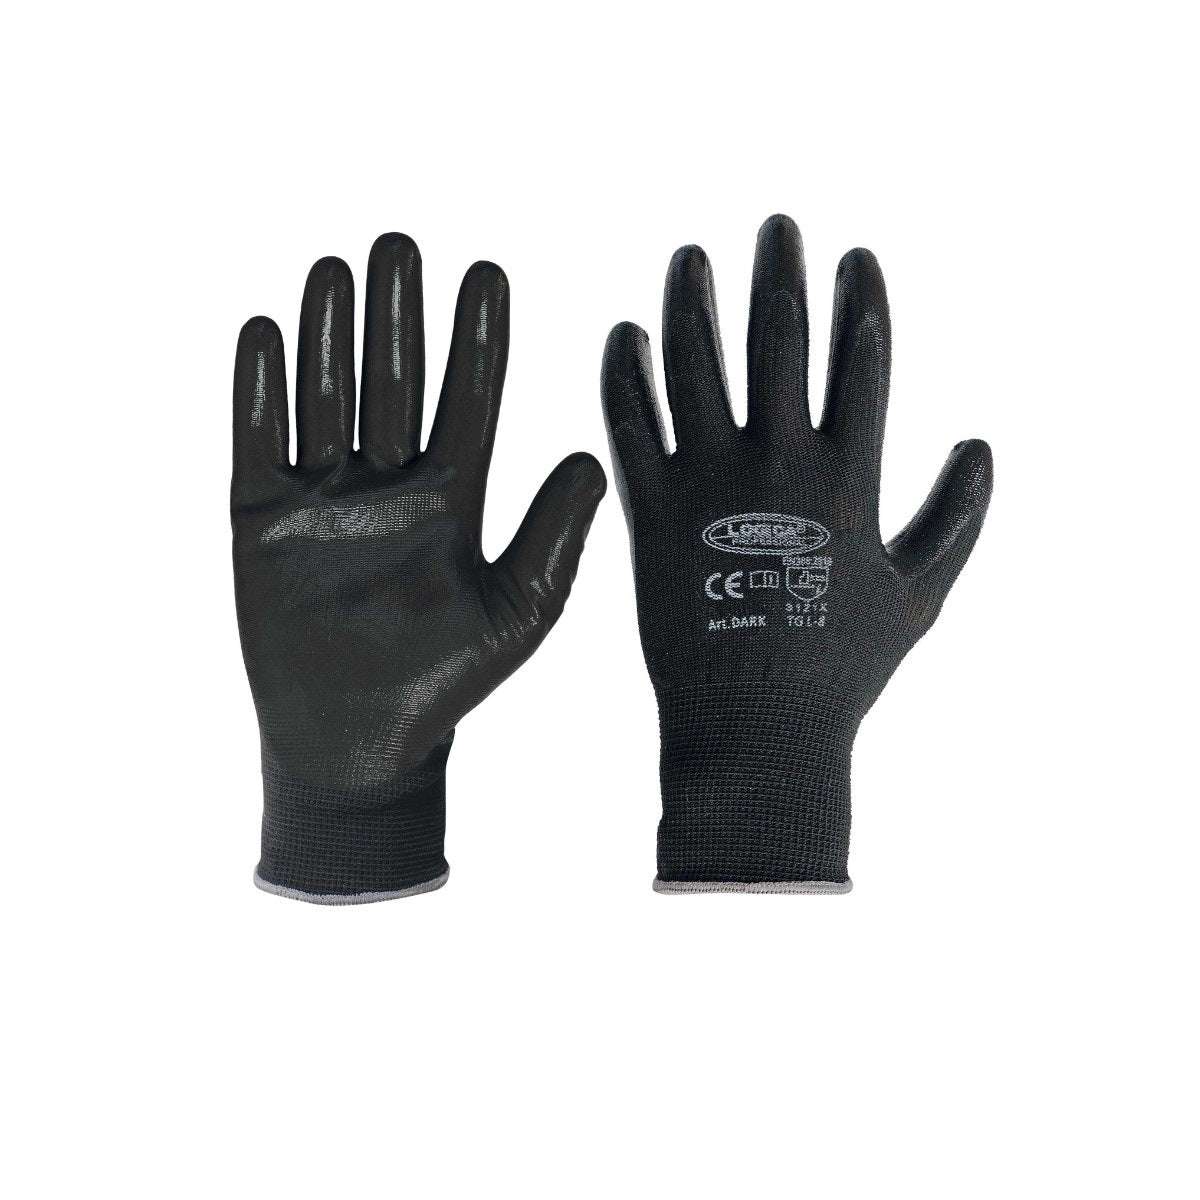 Polyester continuous thread glove black size 10 - Logica